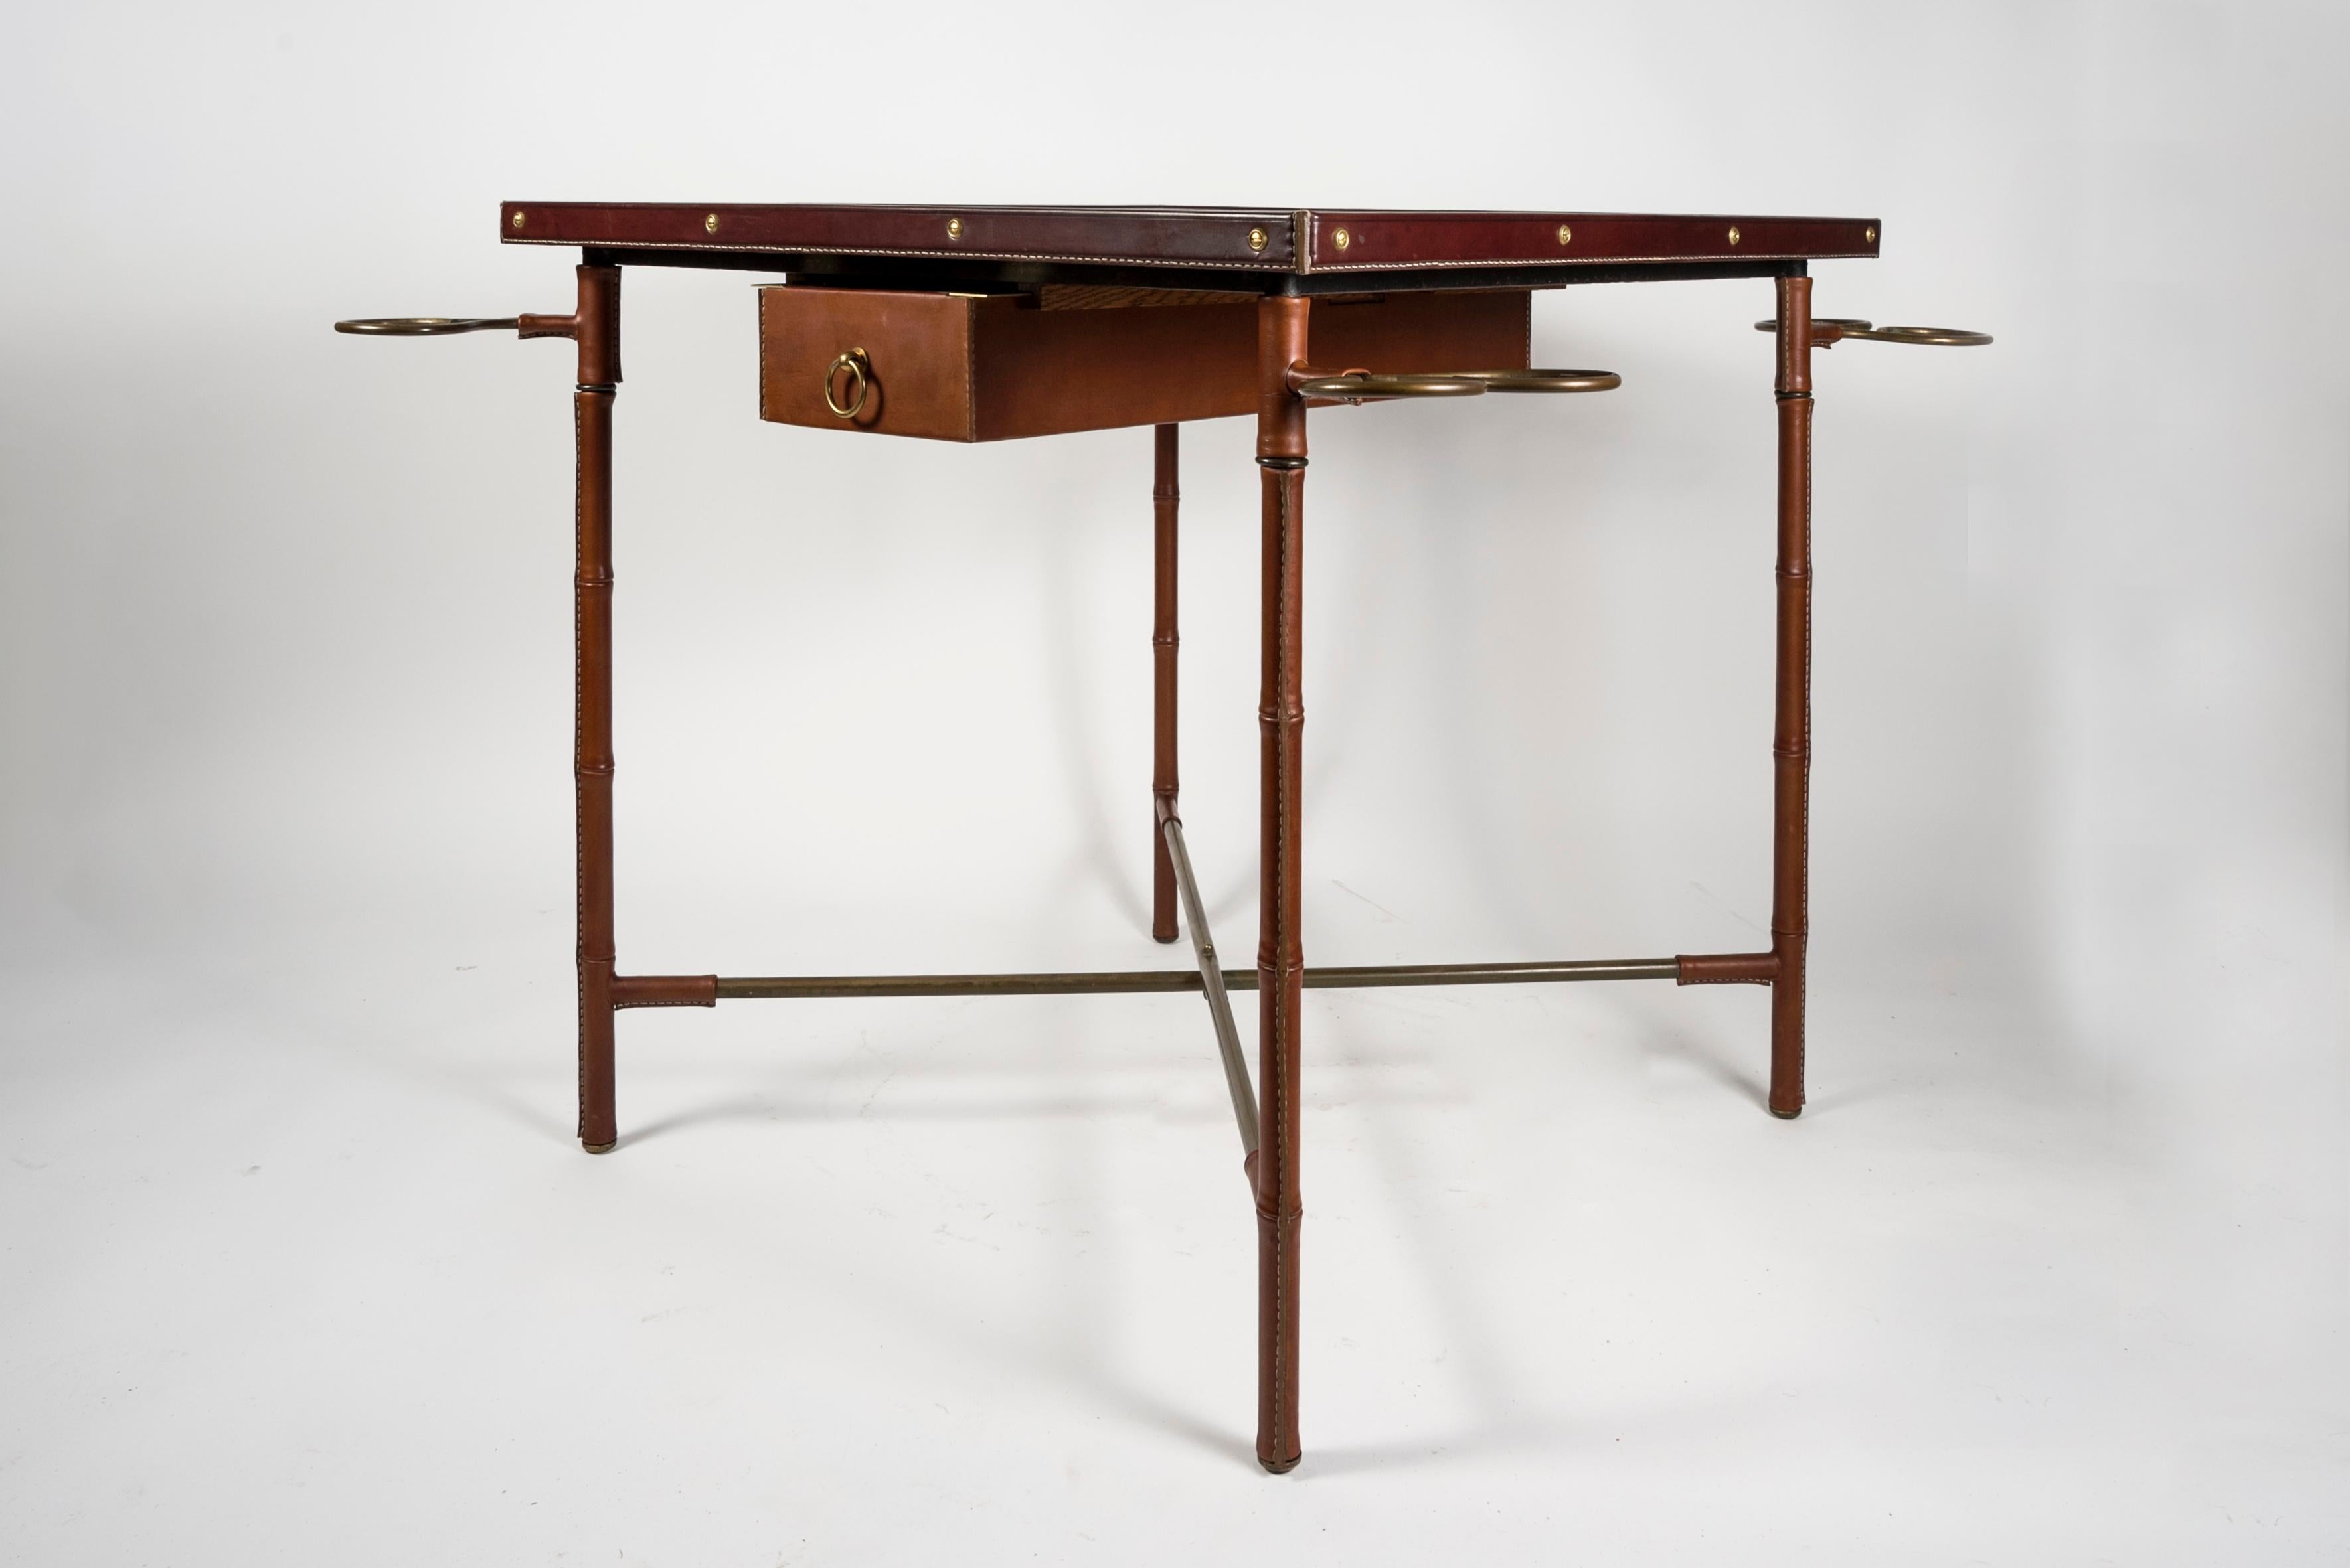 What's a beauty !!!
This table is just stunning.
Look at the pics, this better than all description ;-)
1950's Stitched leather game table by Jacques Adnet
France.